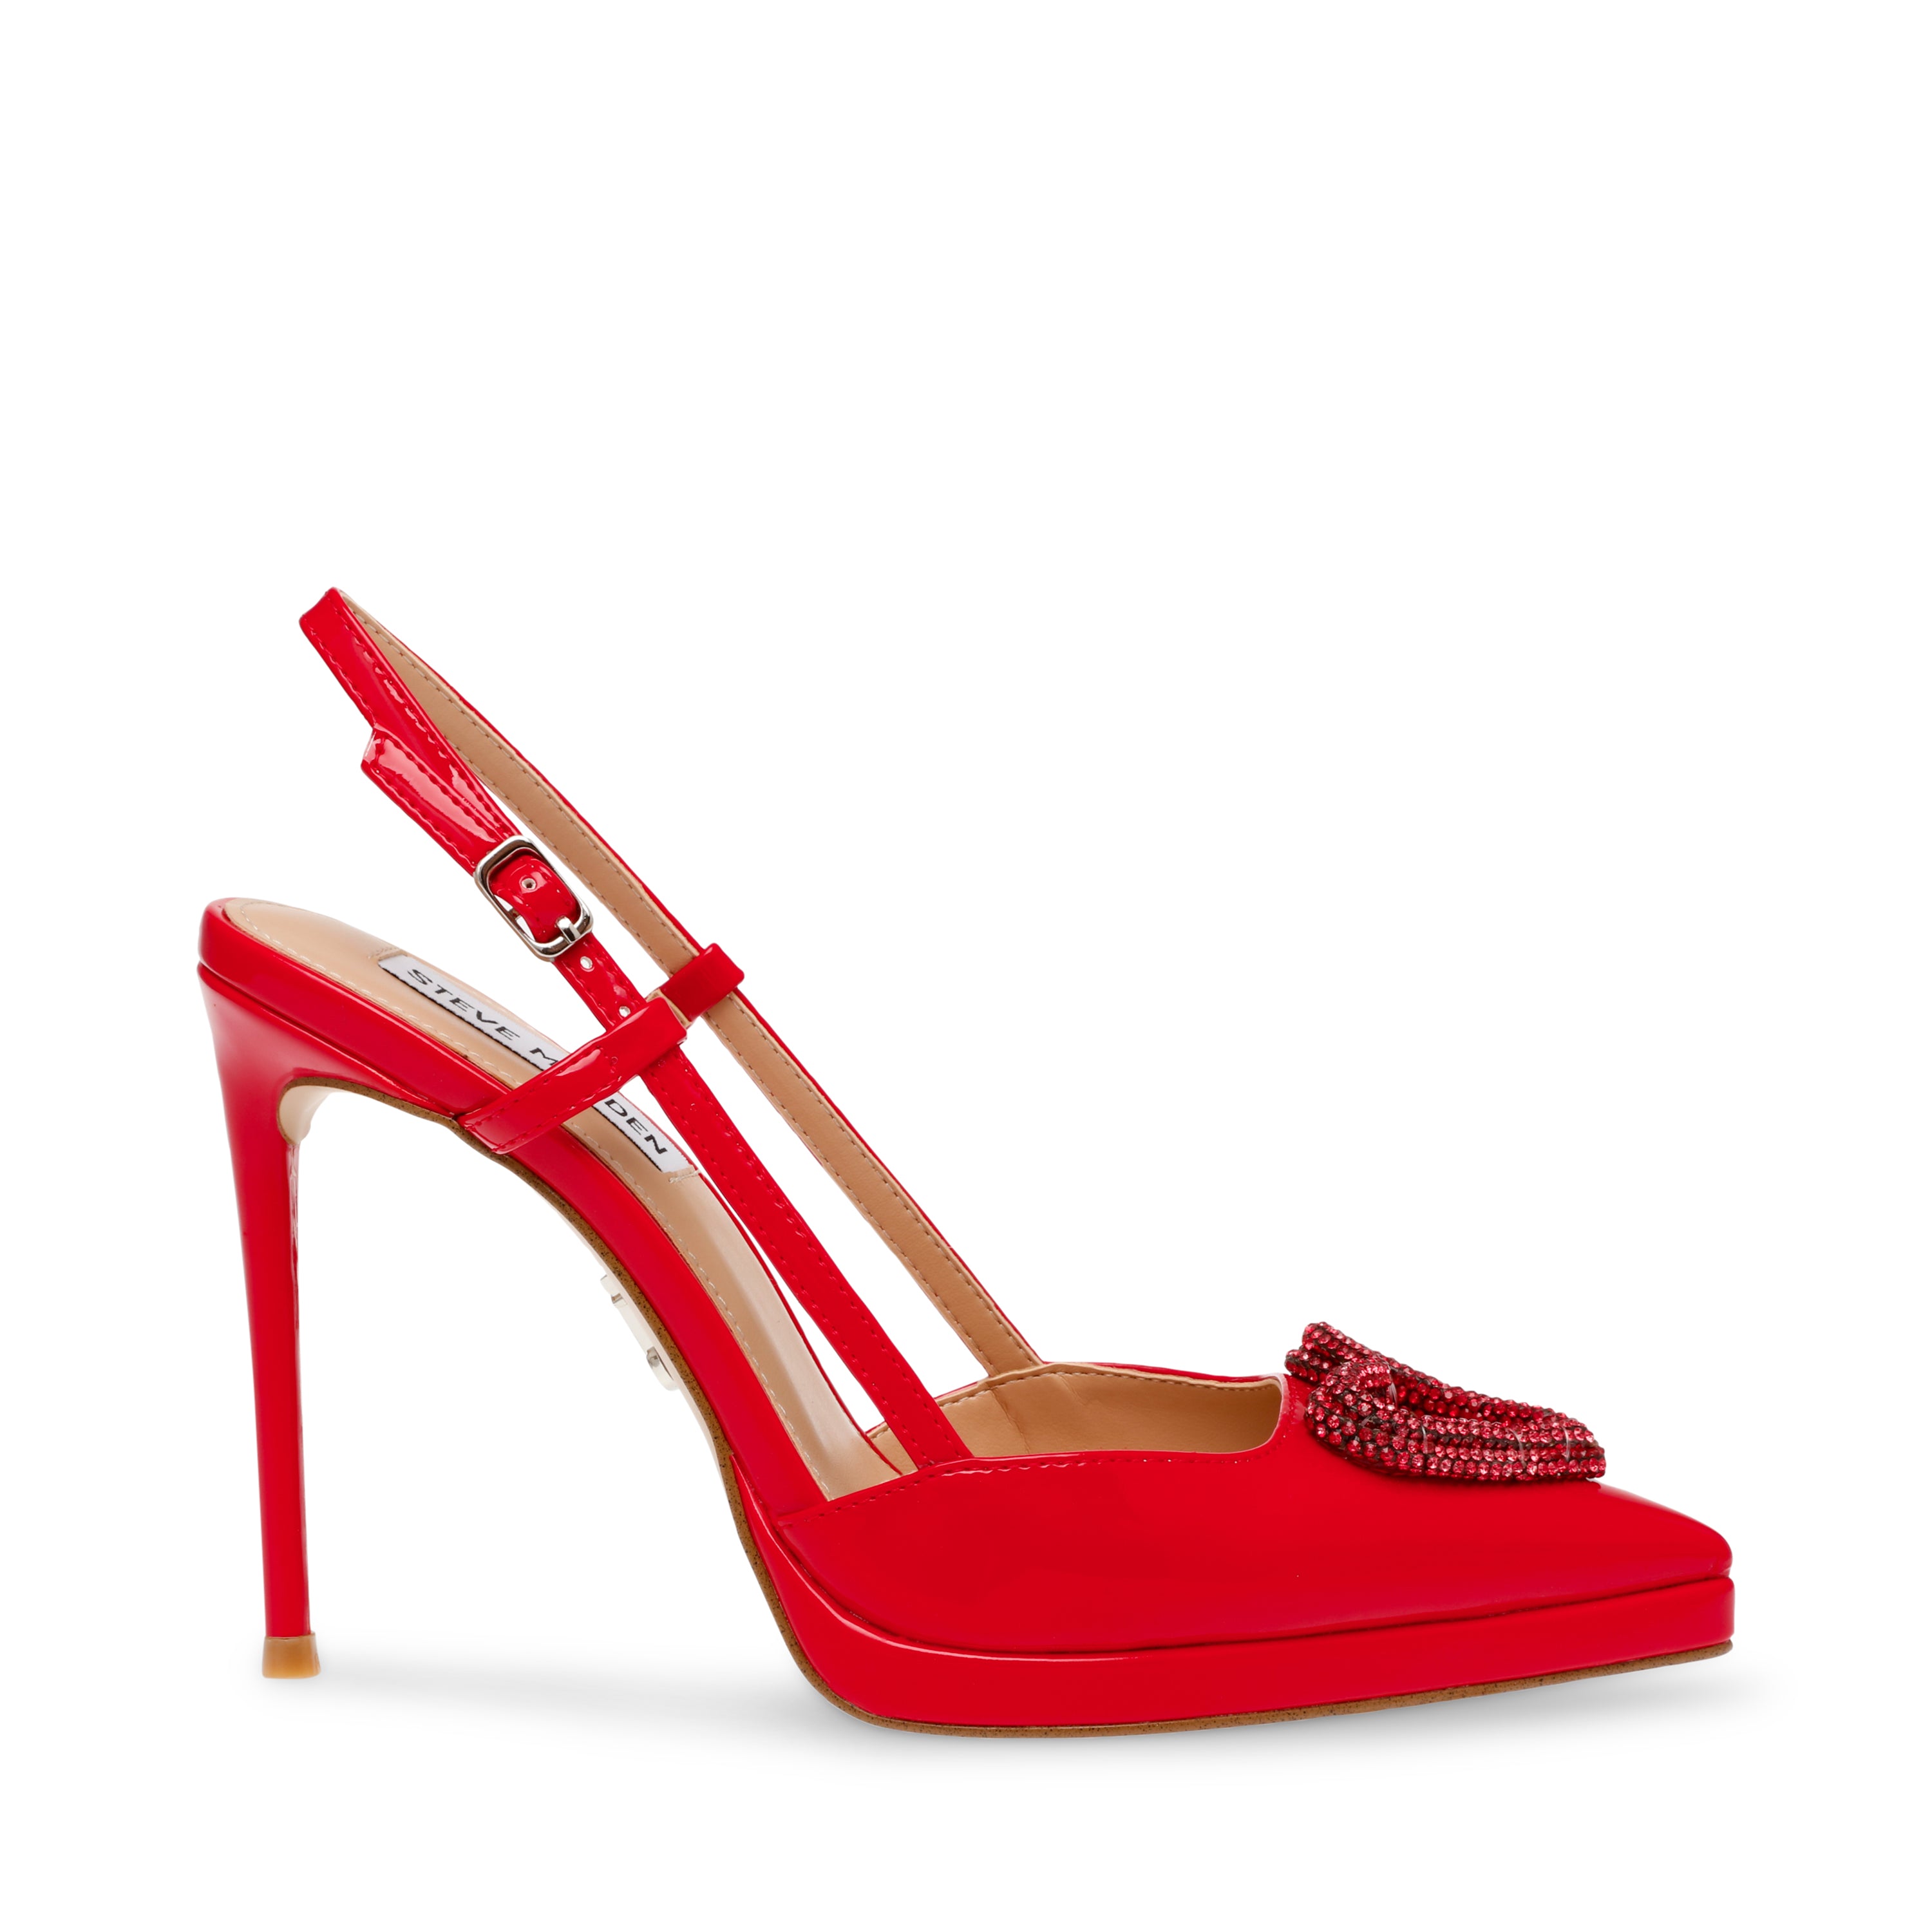 KIND-HEART RED PATENT HEELS